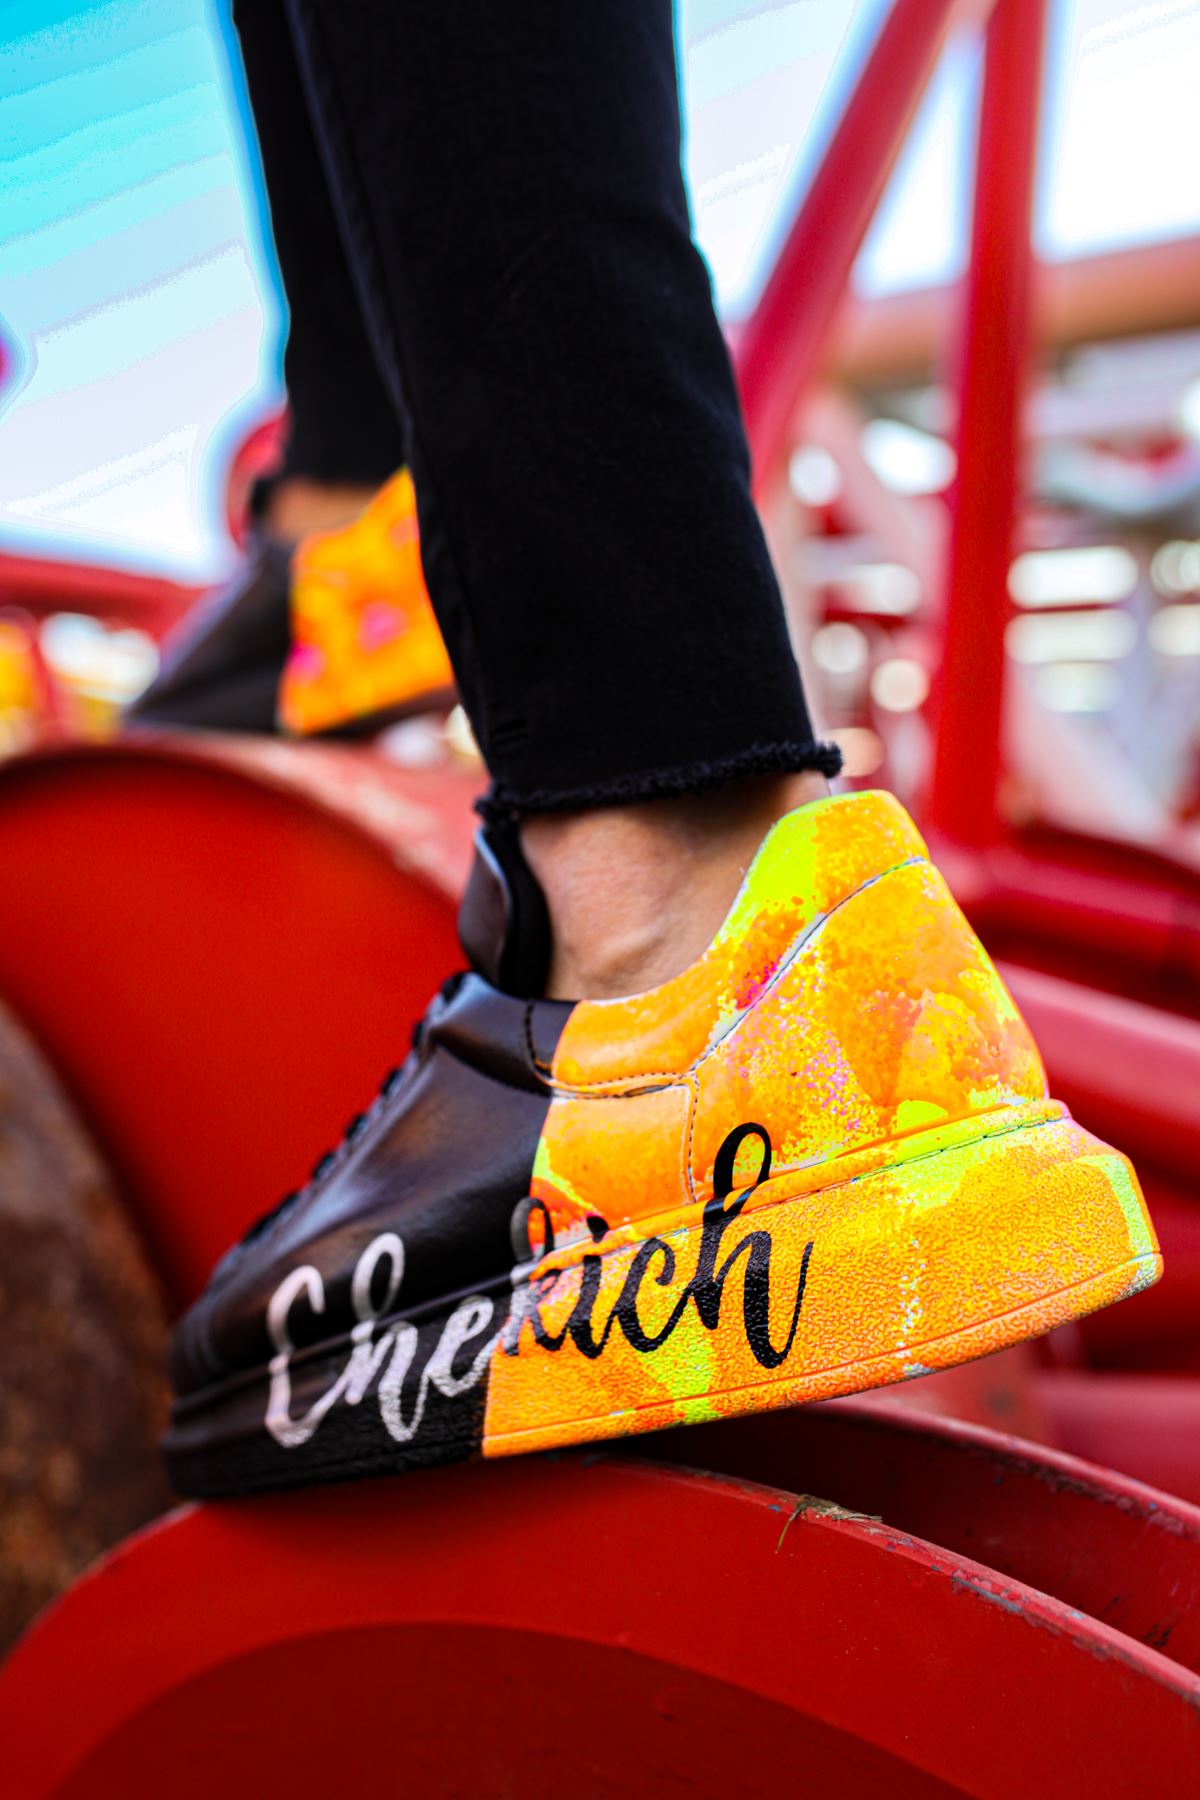 Chekich Men's and Women's Sneakers Black Yellow Aloha Mixed Color Written Lace-up Splash Pattern Unisex Shoes Odorless Casual Air Comfortable Lovers Different Options Hiking Spring Summer Autumn Seasons CH254 - 476